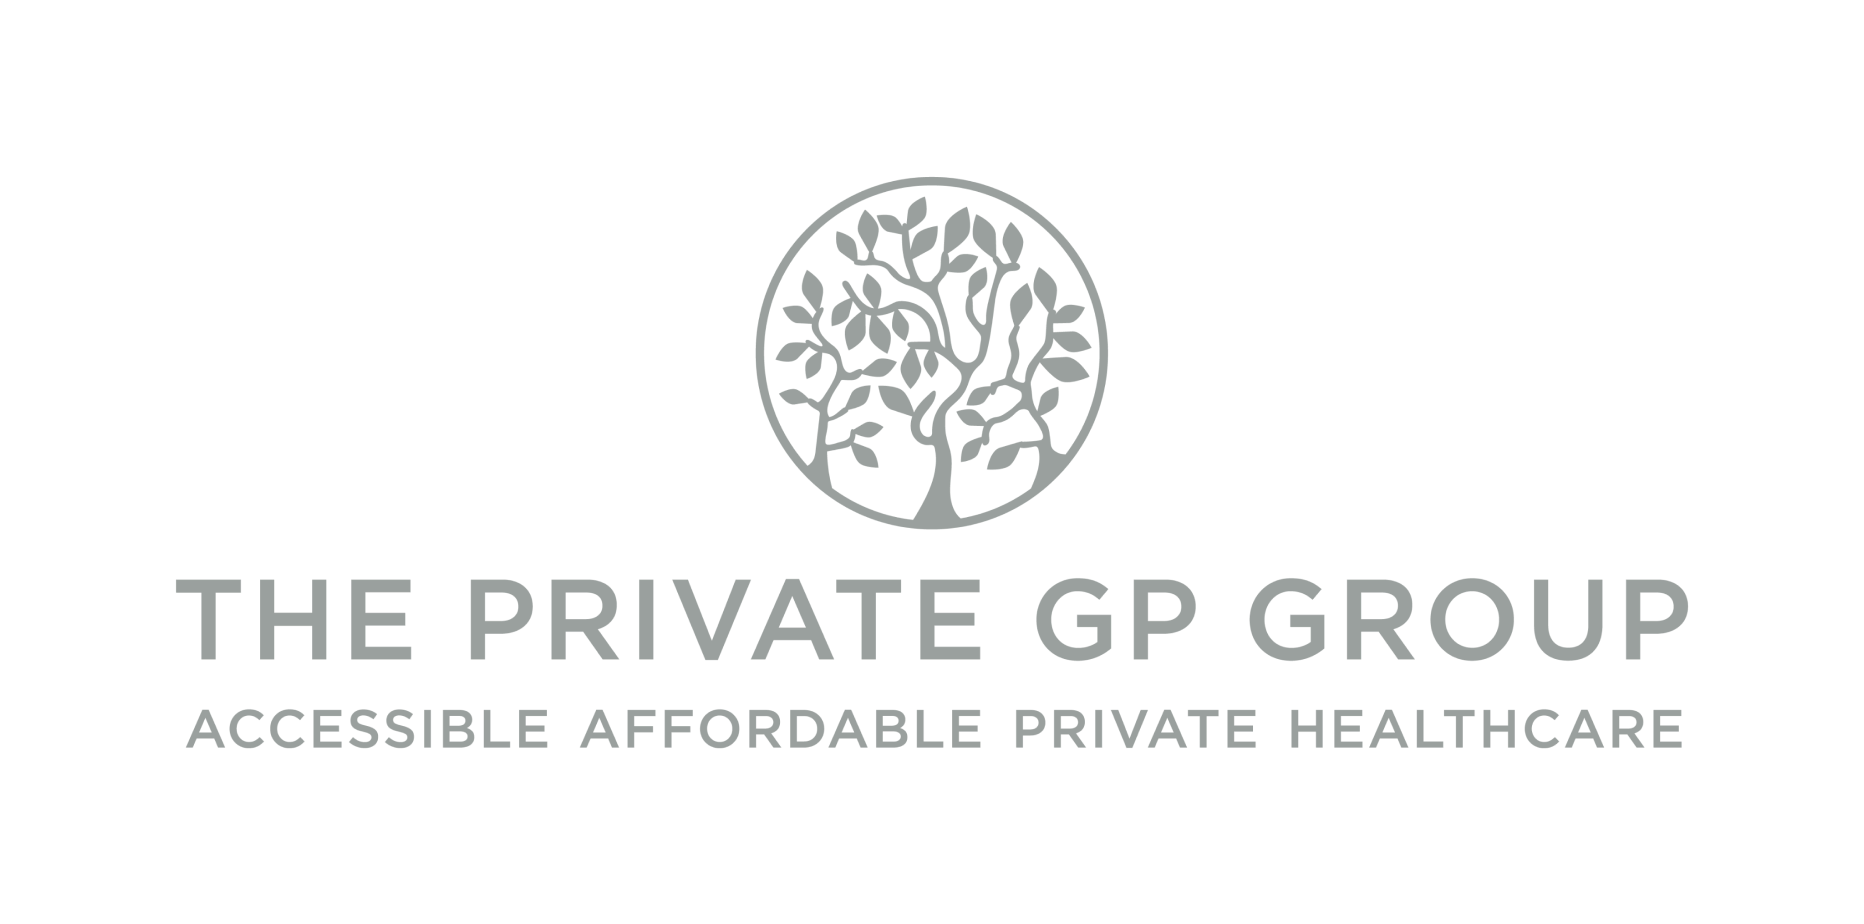 The Private GP Group